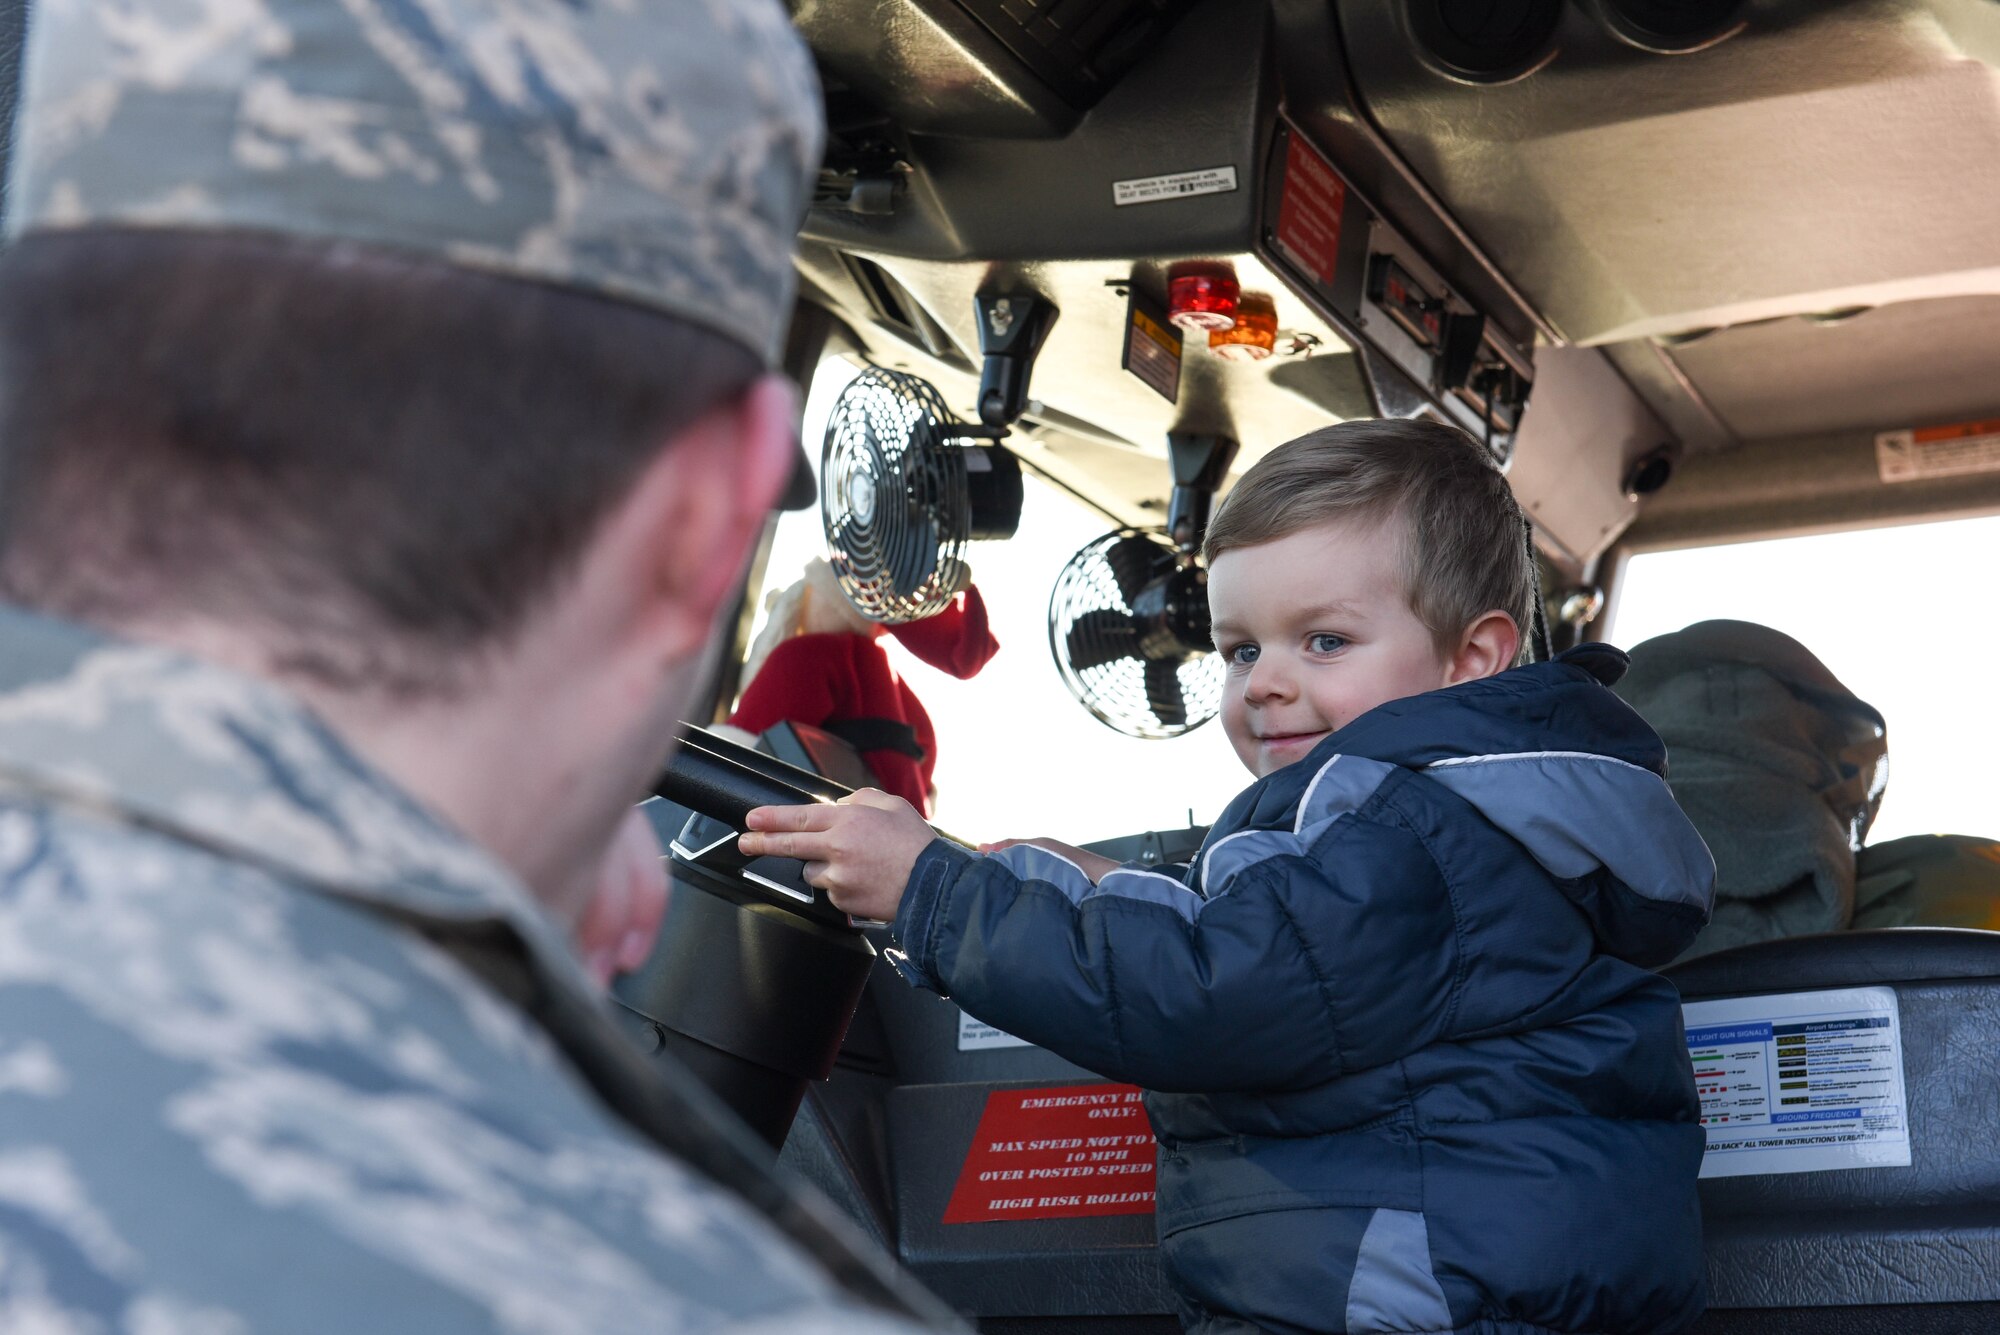 A child at Ellsworth Air Force Base, S.D., is given the chance sit in the front seat of a fire truck on Dec. 13, 2018. Following a “Santa and Me Story Time” event at the Holbrook Library, attendees were invited to the parking lot to tour a fire truck and visit with firefighters from the 28th Civil Engineer Squadron Fire Department. (U.S. Air Force photo by Airman John Ennis)